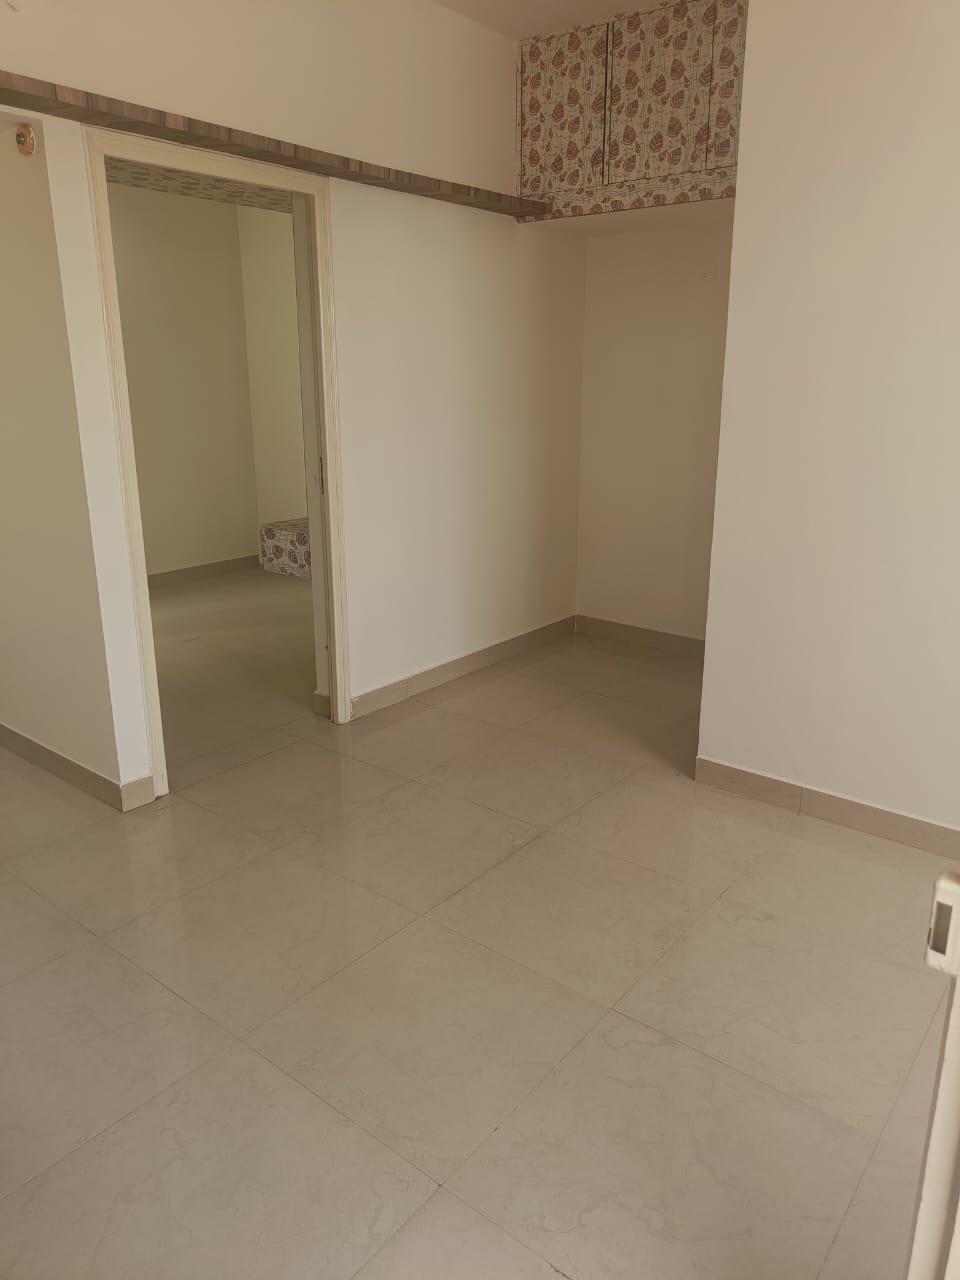 2 BHK Residential Apartment for Lease Only at JAML2 - 1075 in Sarjapur